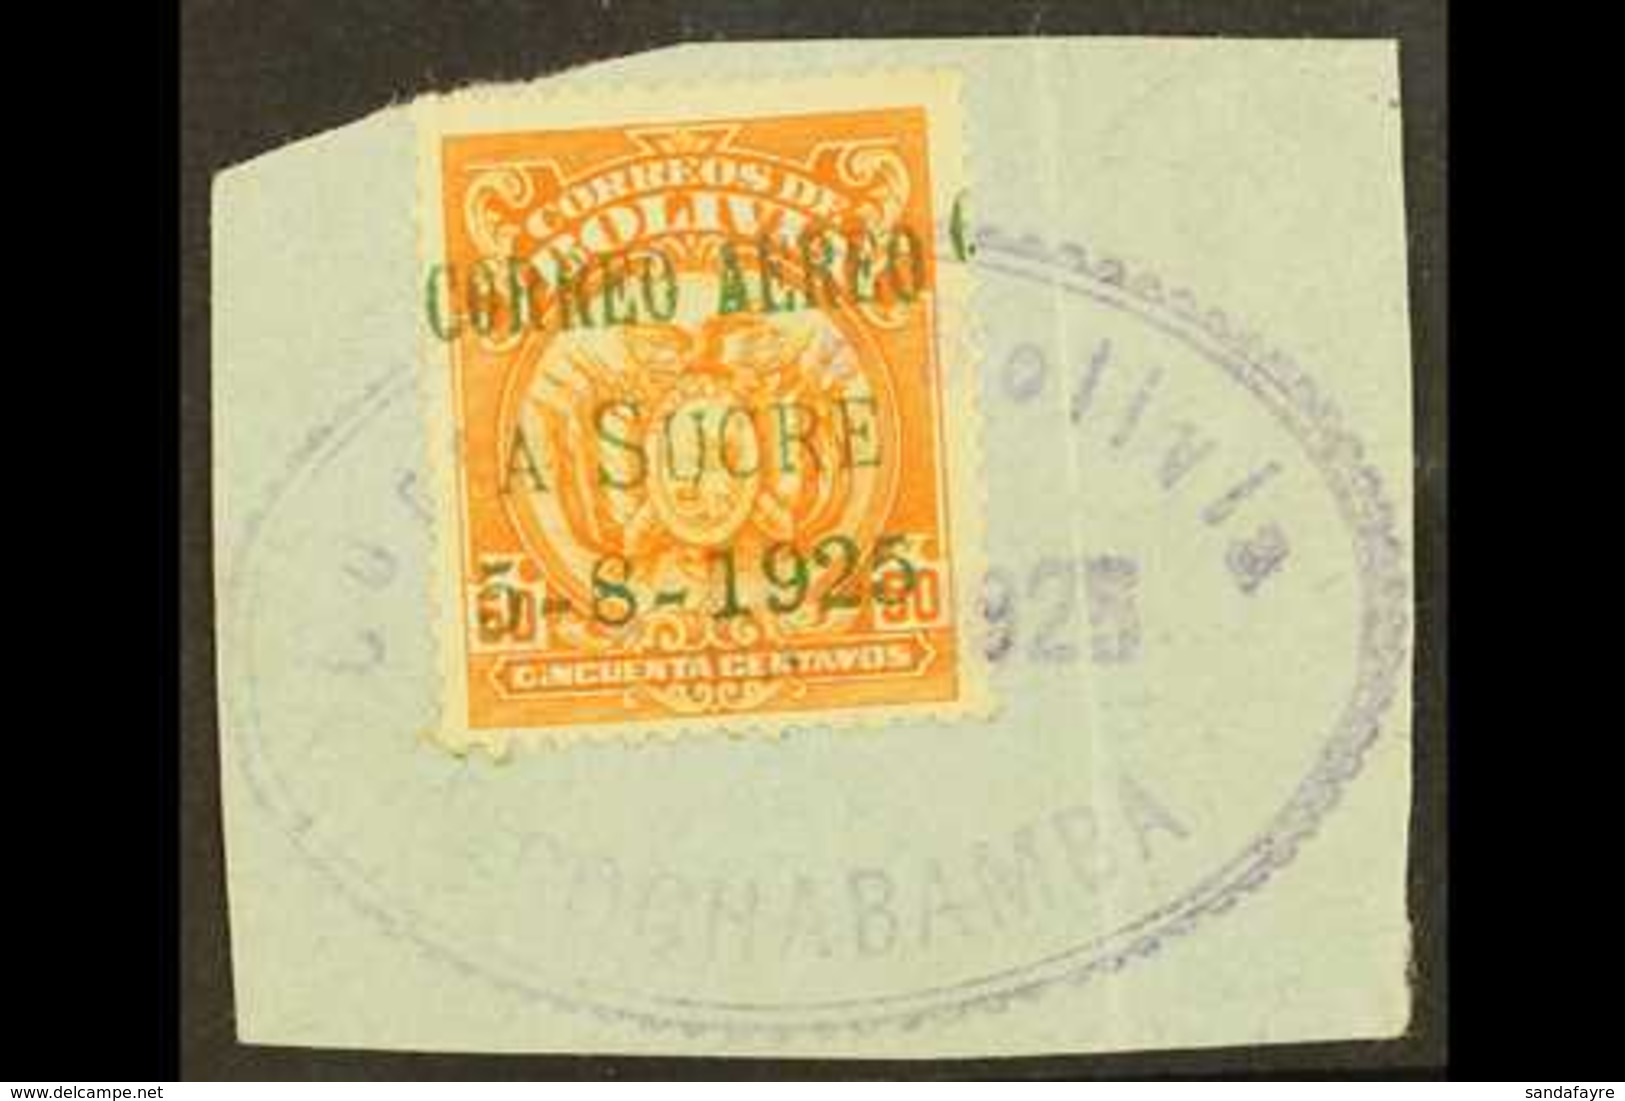 1925 FIRST FLIGHT SPECIAL OVERPRINTED STAMP. 50c Orange Air With "Correo Aereo A Sucre" Overprint (Michel 148, Sanabria  - Bolivia